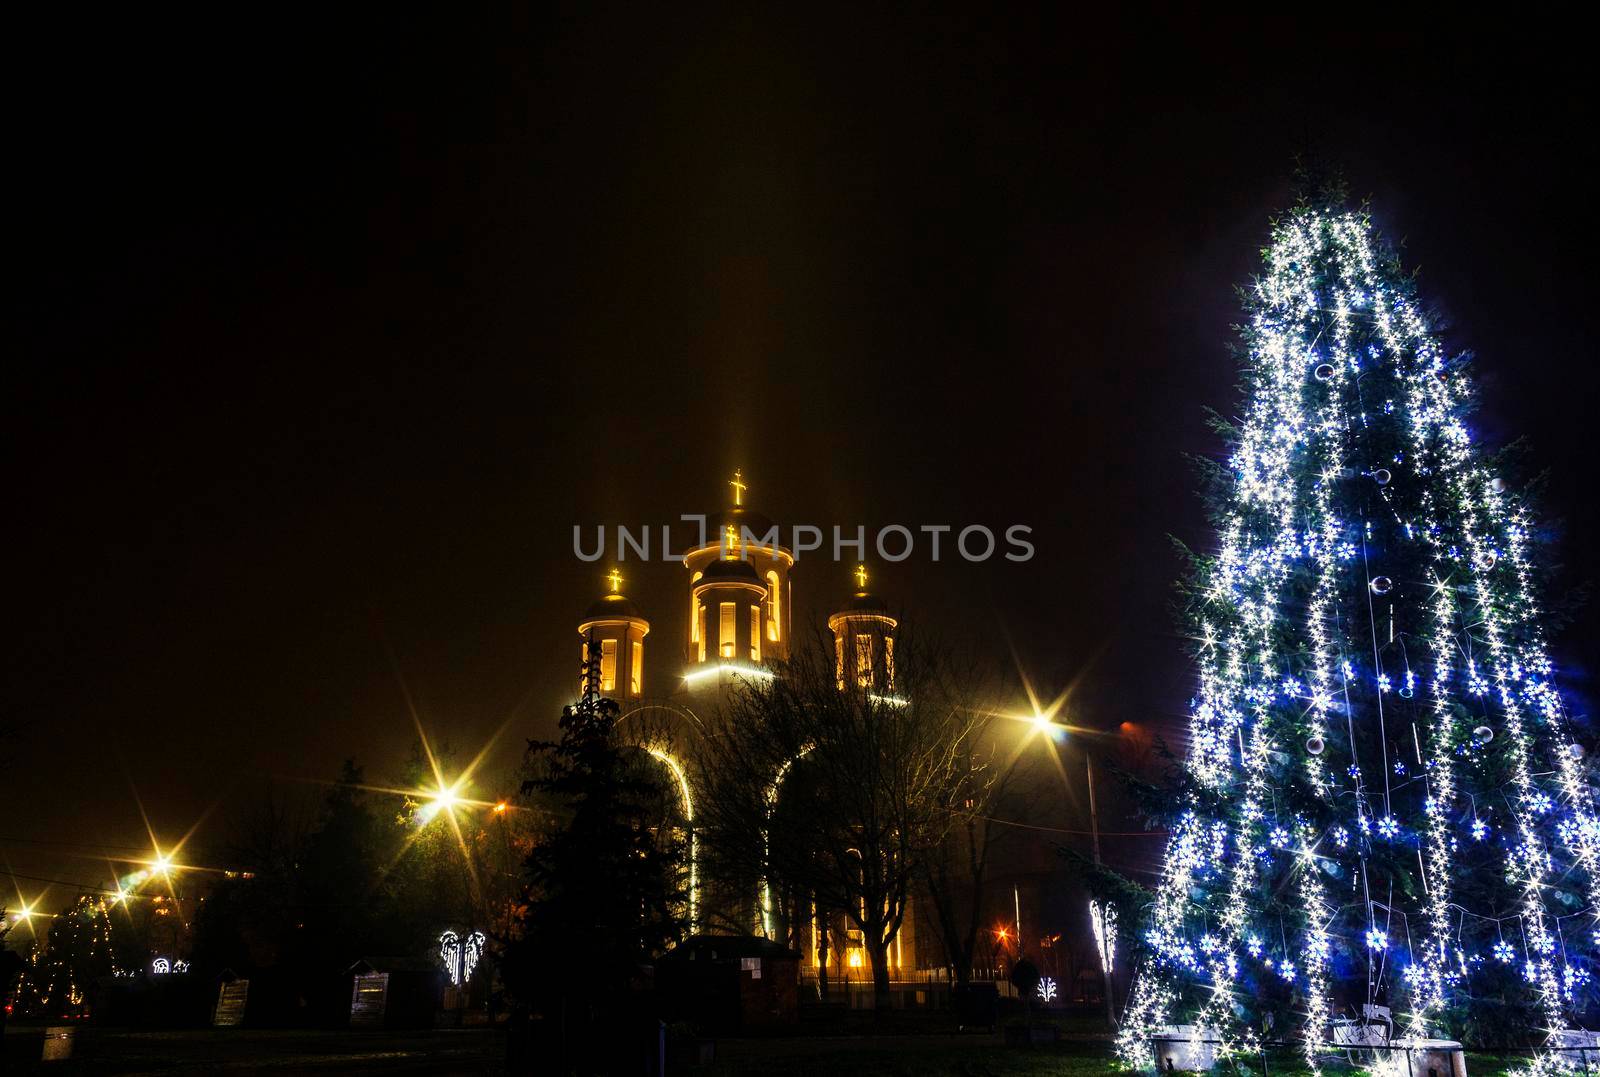 A Christmas tree near a cathedral by bybyphotography